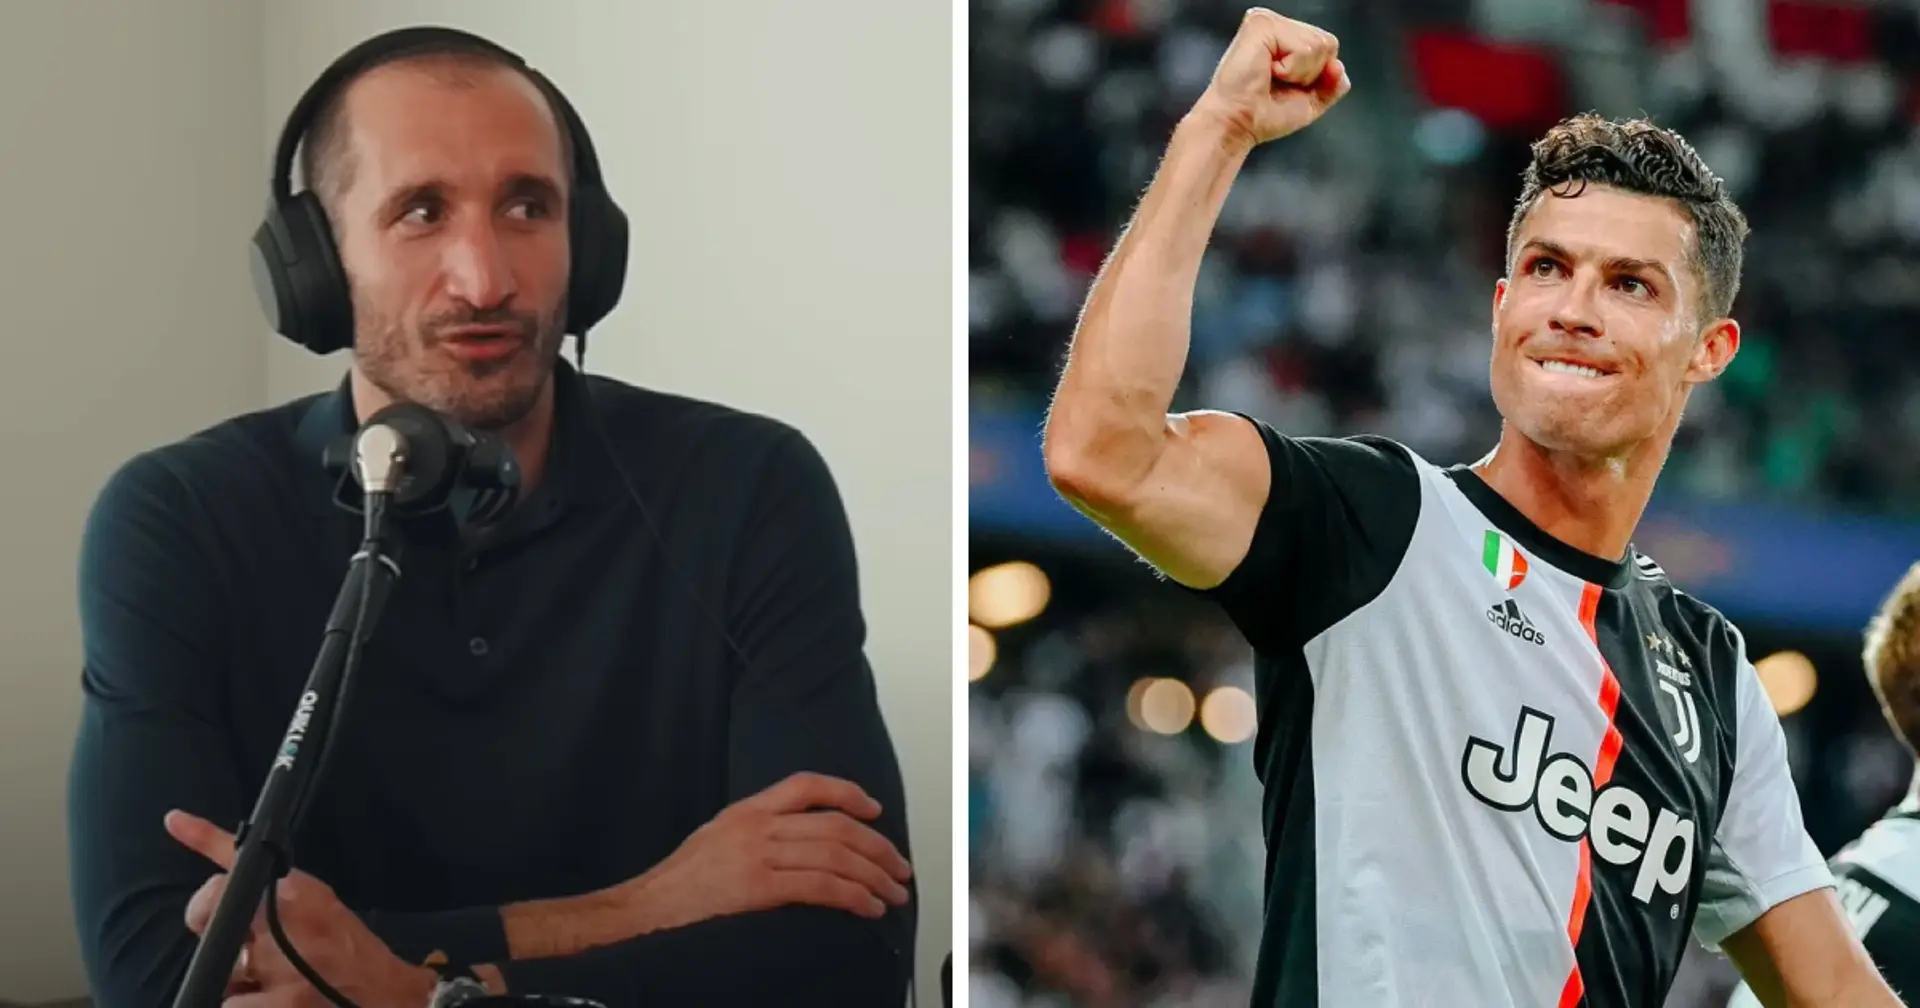 'He wanted to shake the world': Giorgio Chiellini recalls Ronaldo's mentality after leaving Real Madrid 